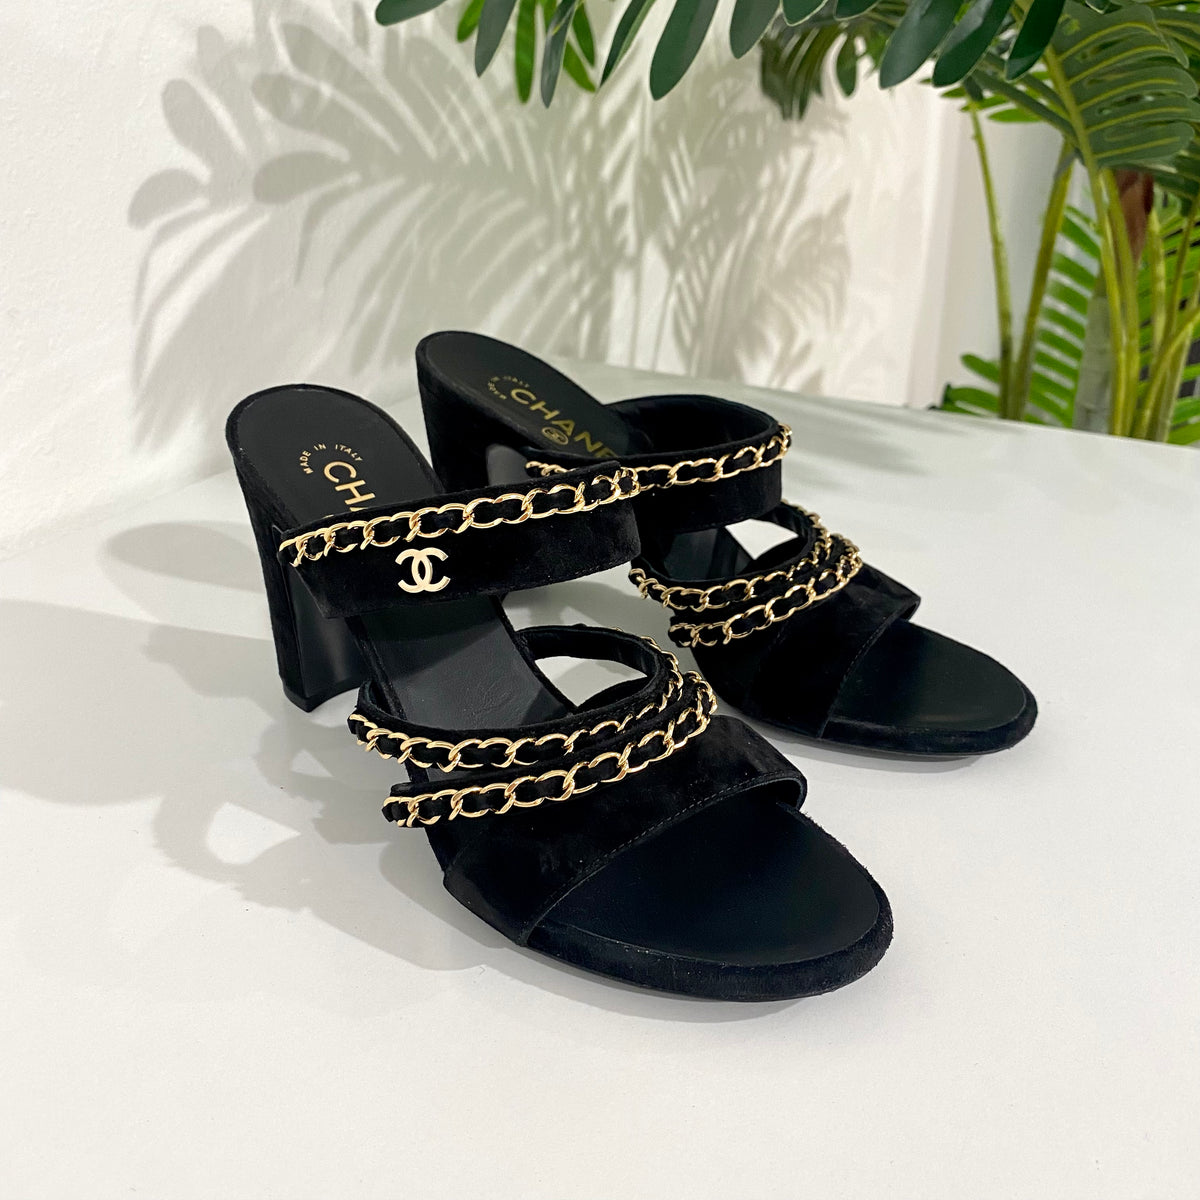 chanel black and gold sandals